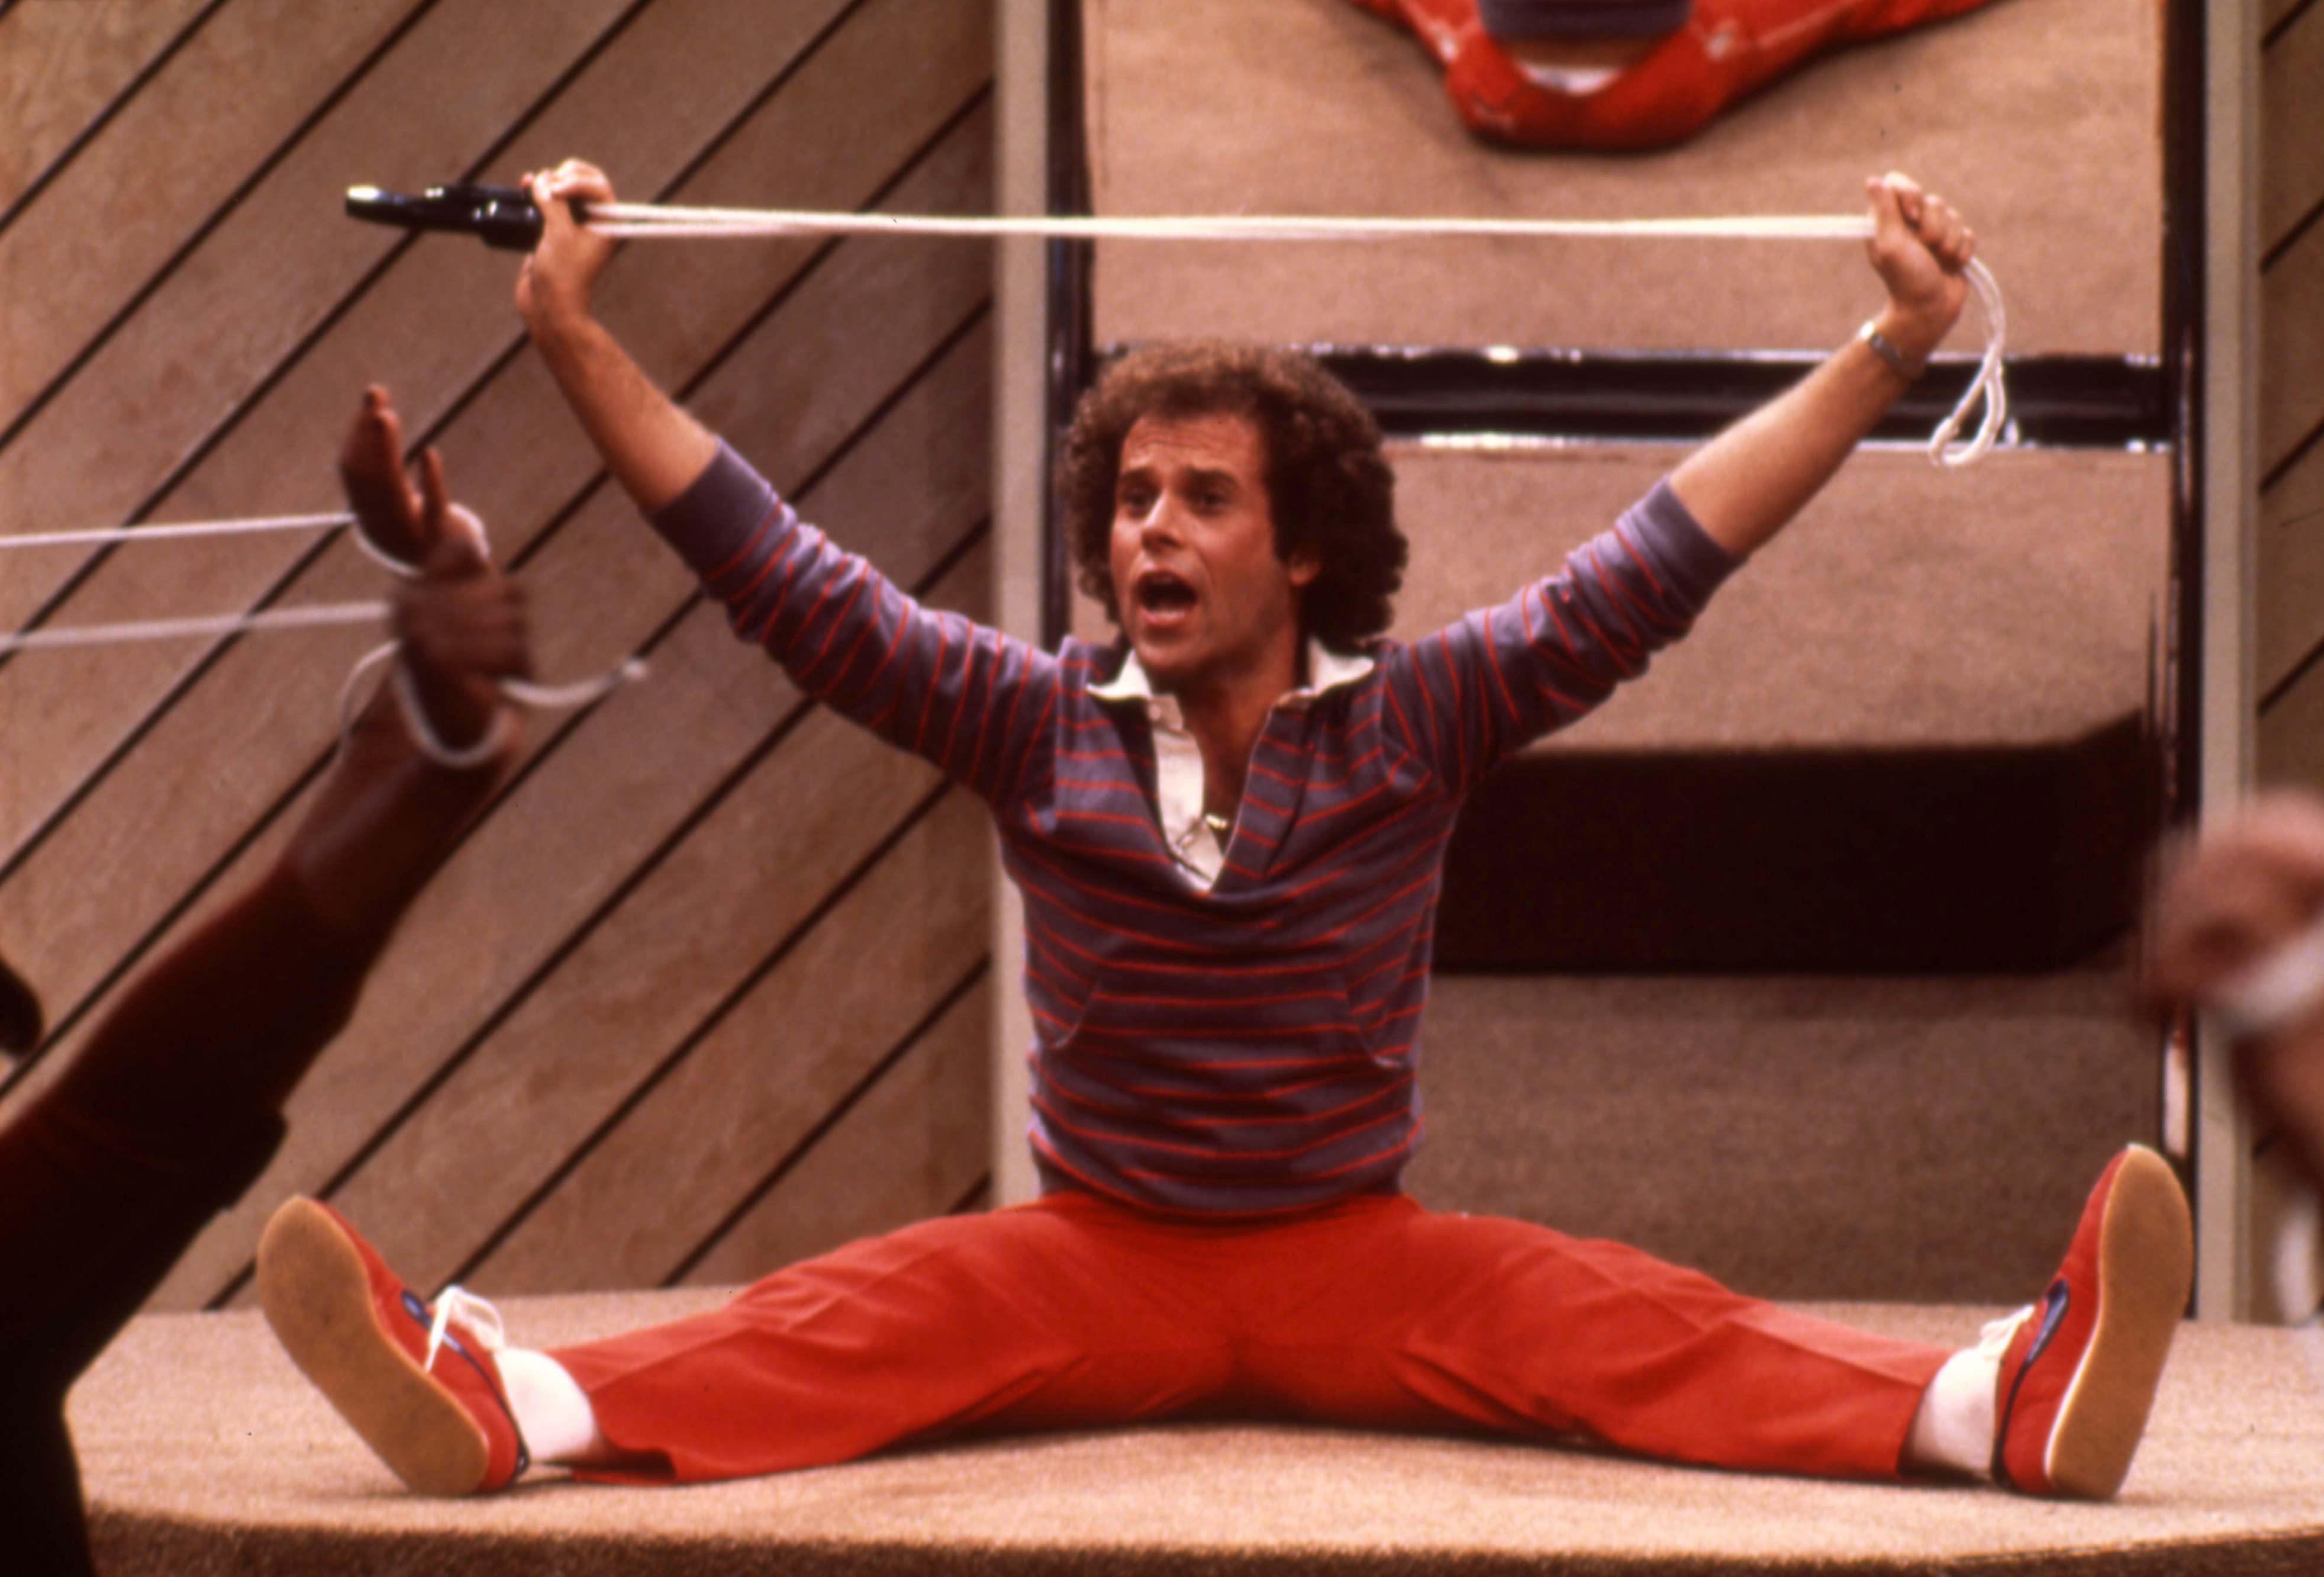 American fitness coach Richard Simmons in Los Angeles, California, circa 1980 | Source: Getty Images